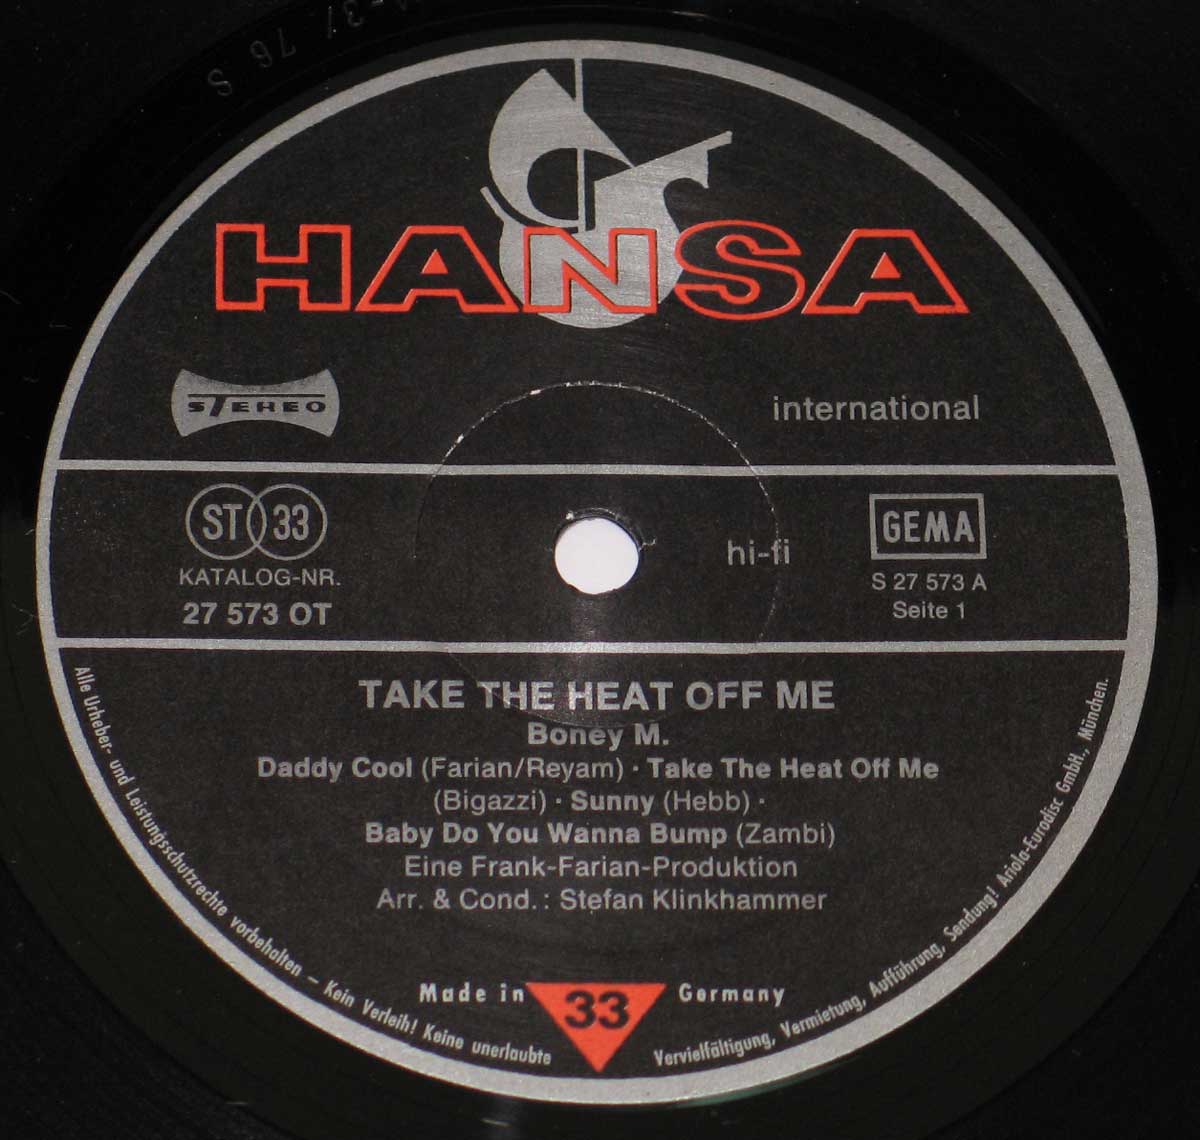   Close-up Photo of  "Take The Heat Off Me" Record Label  